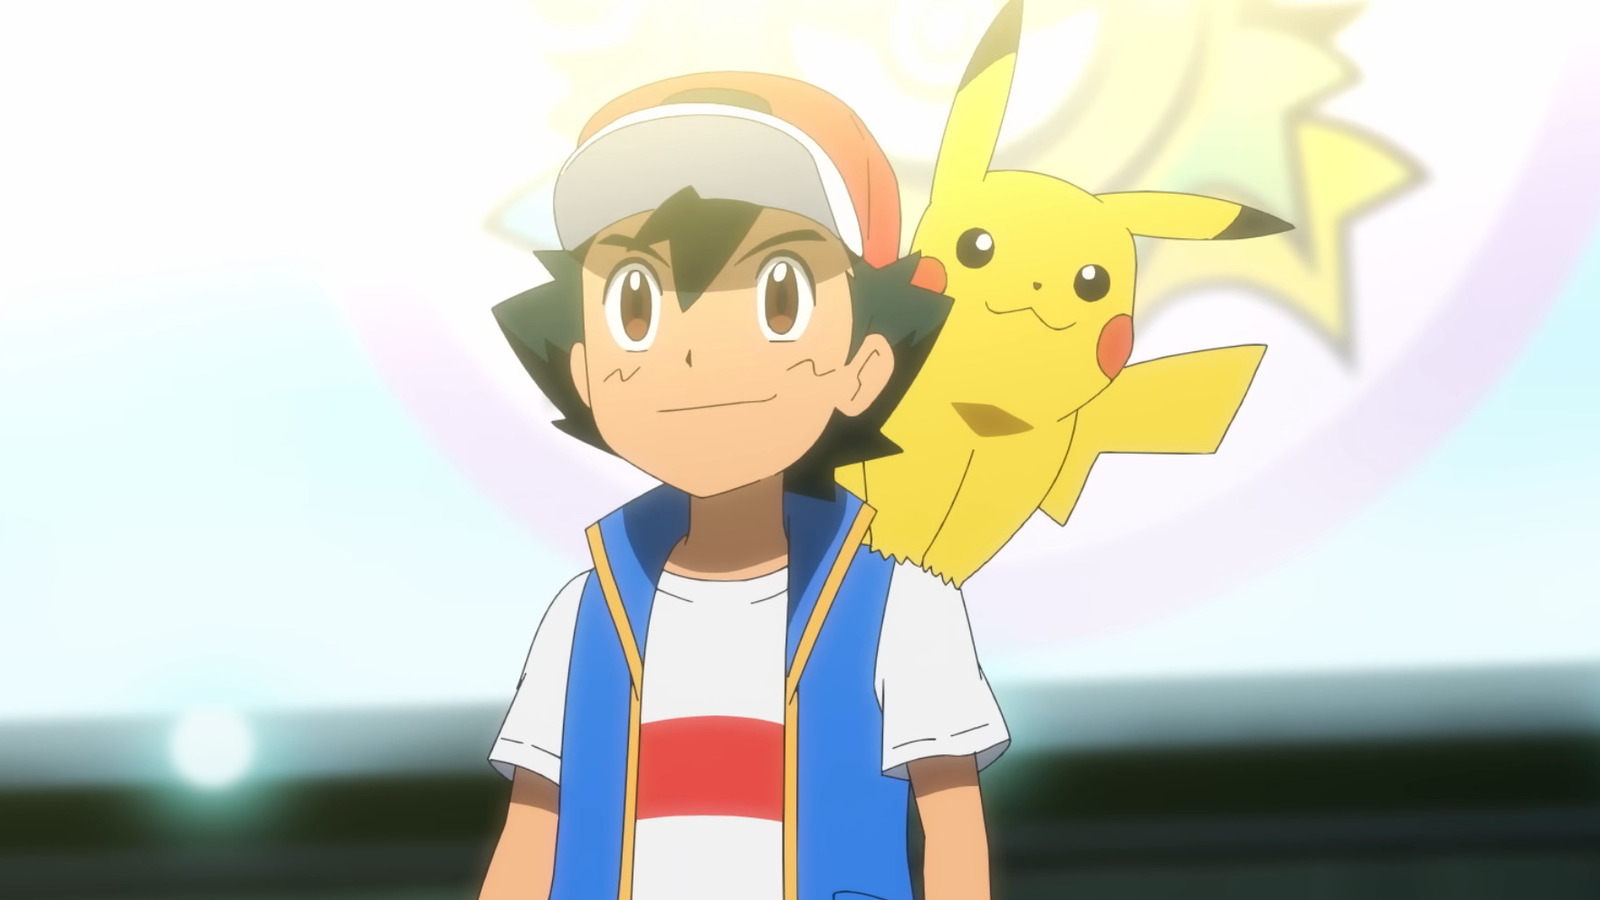 Some Pokemon fans don’t believe they have seen Ash Ketchum’s last appearance.